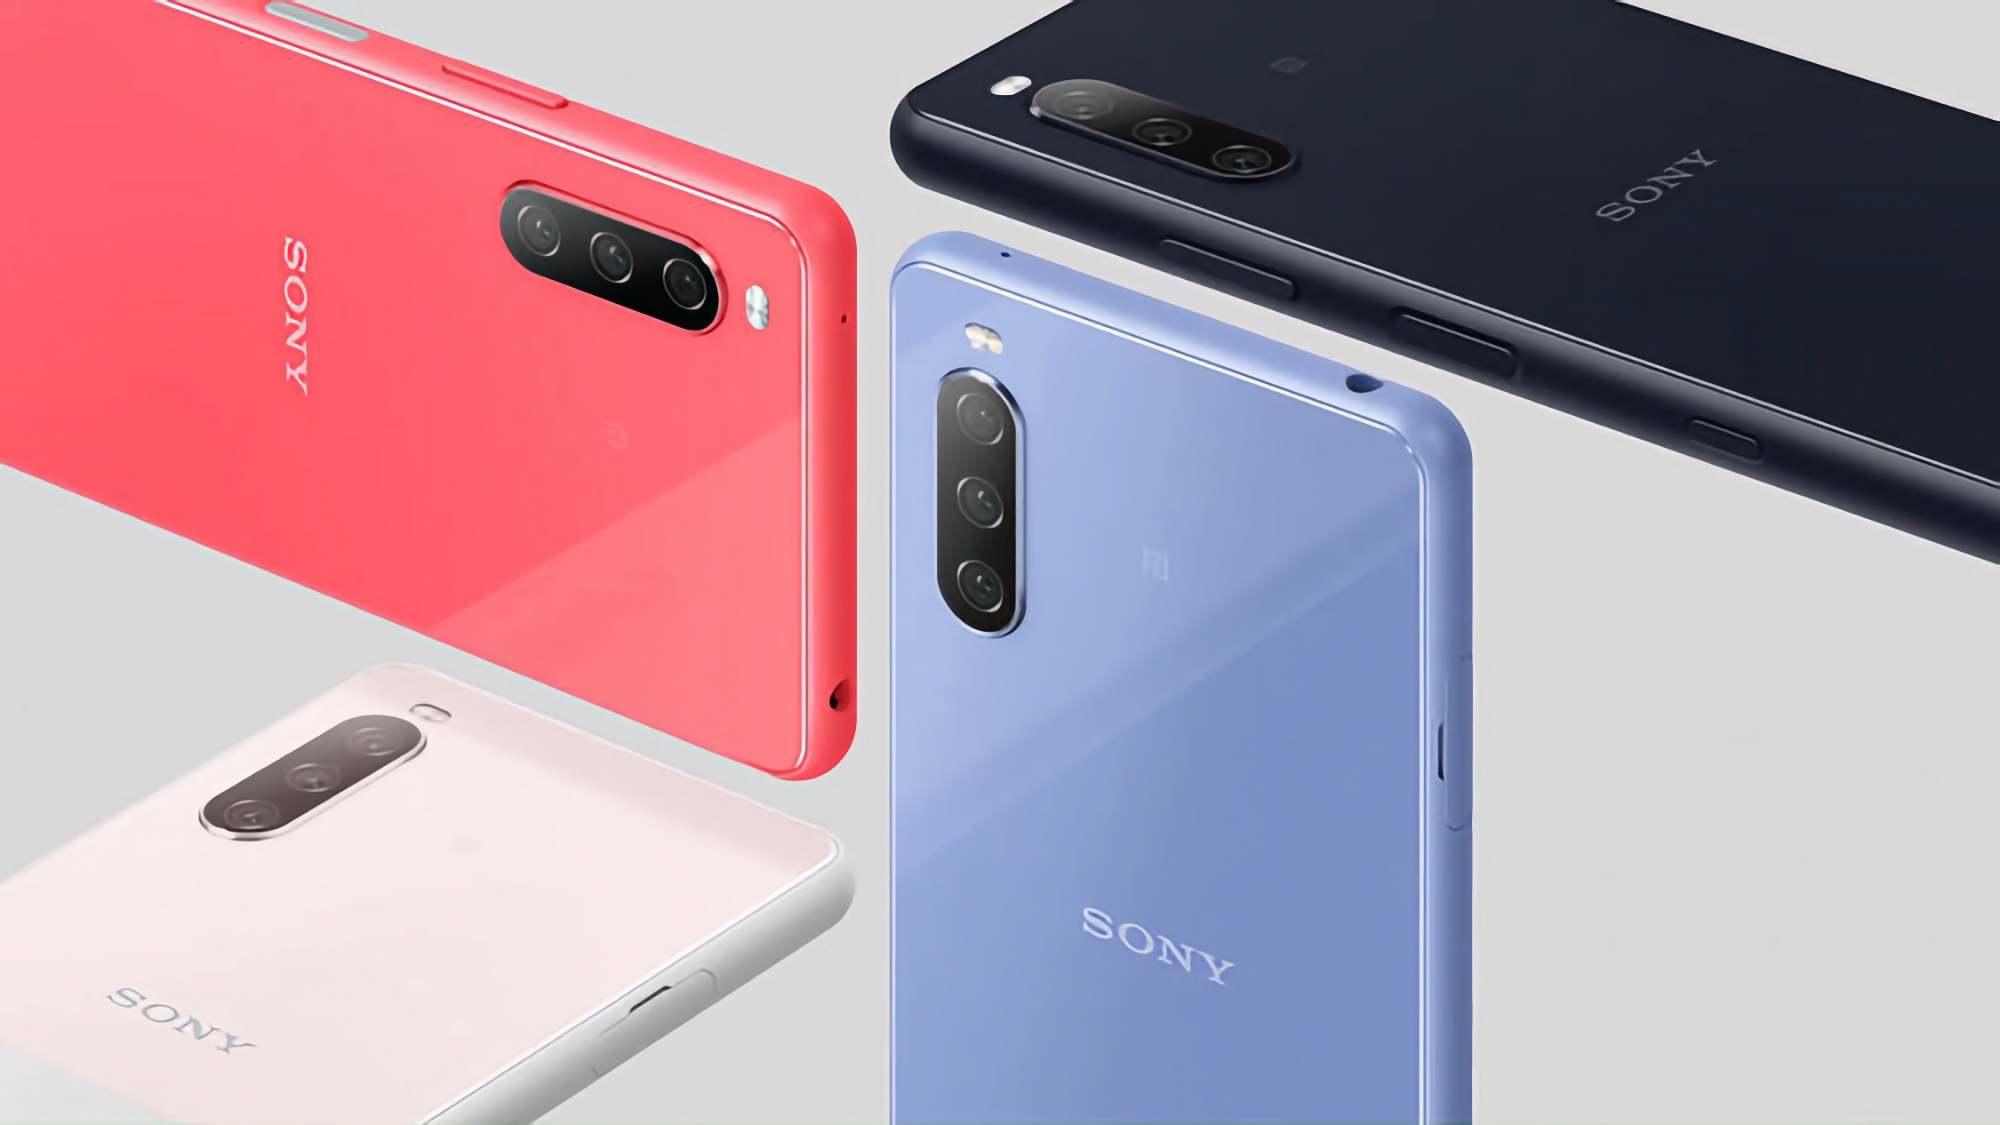 Sony has started updating the Xperia 10 III to Android 13